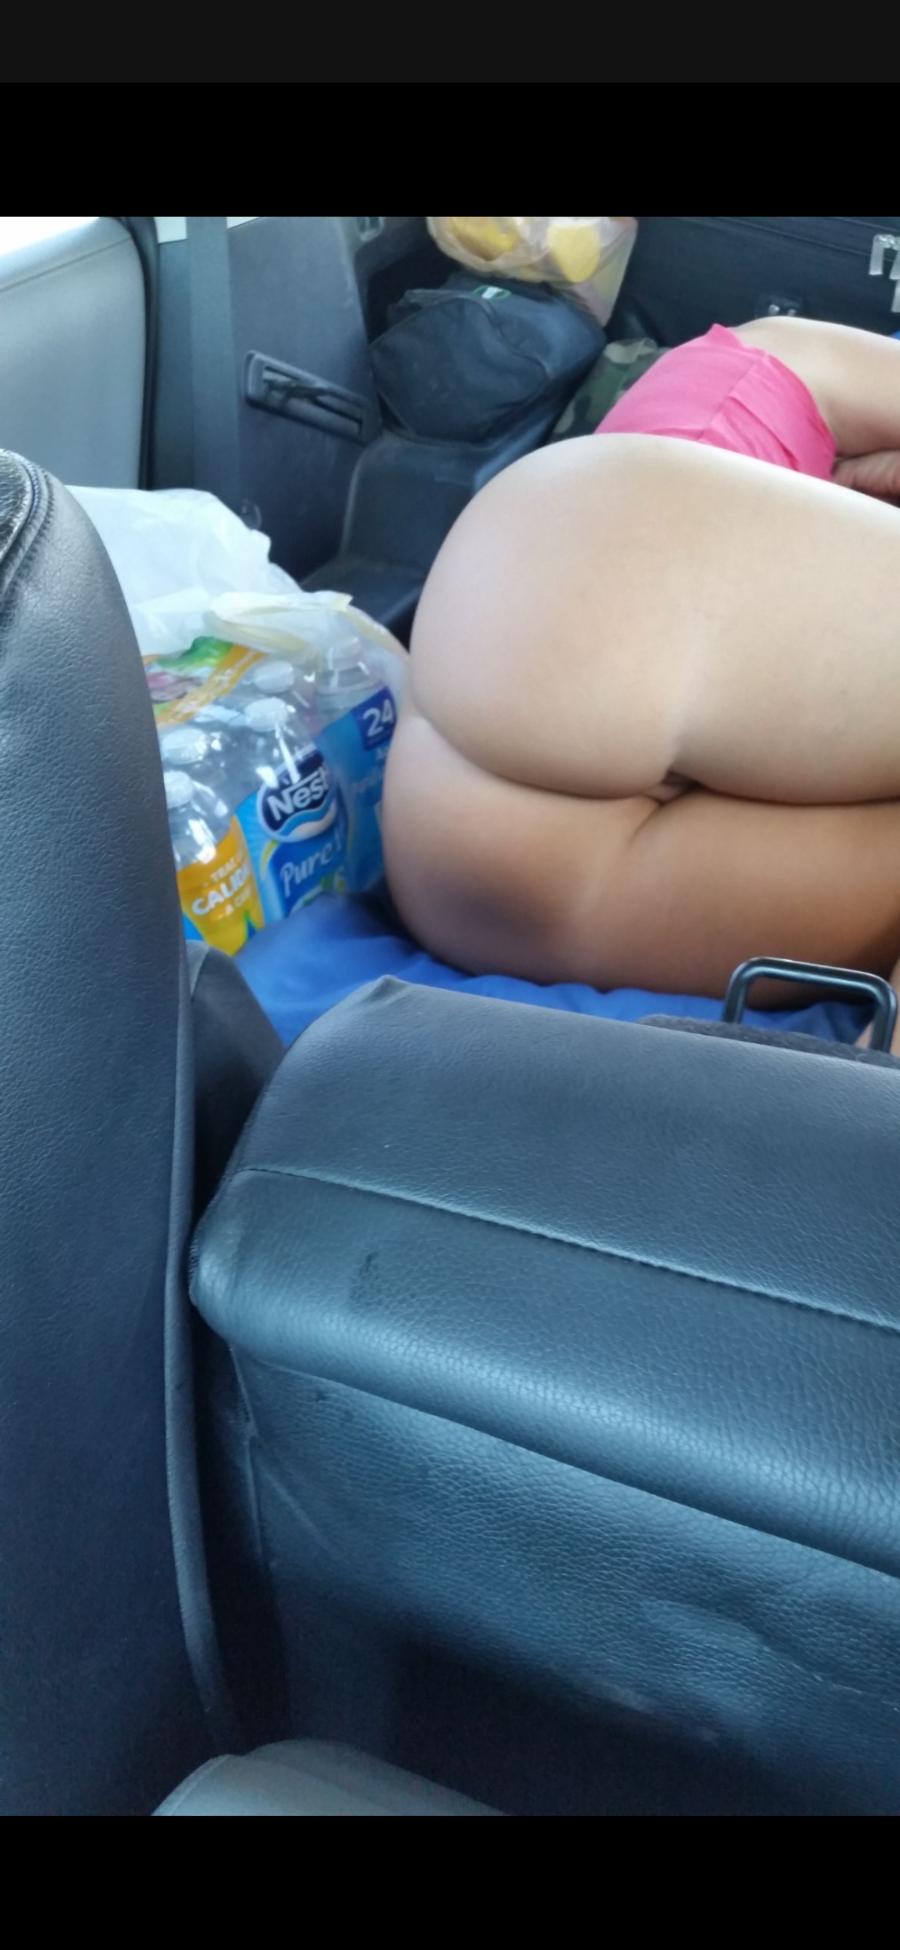 Backseat Booty! Wife's Bum in the Car